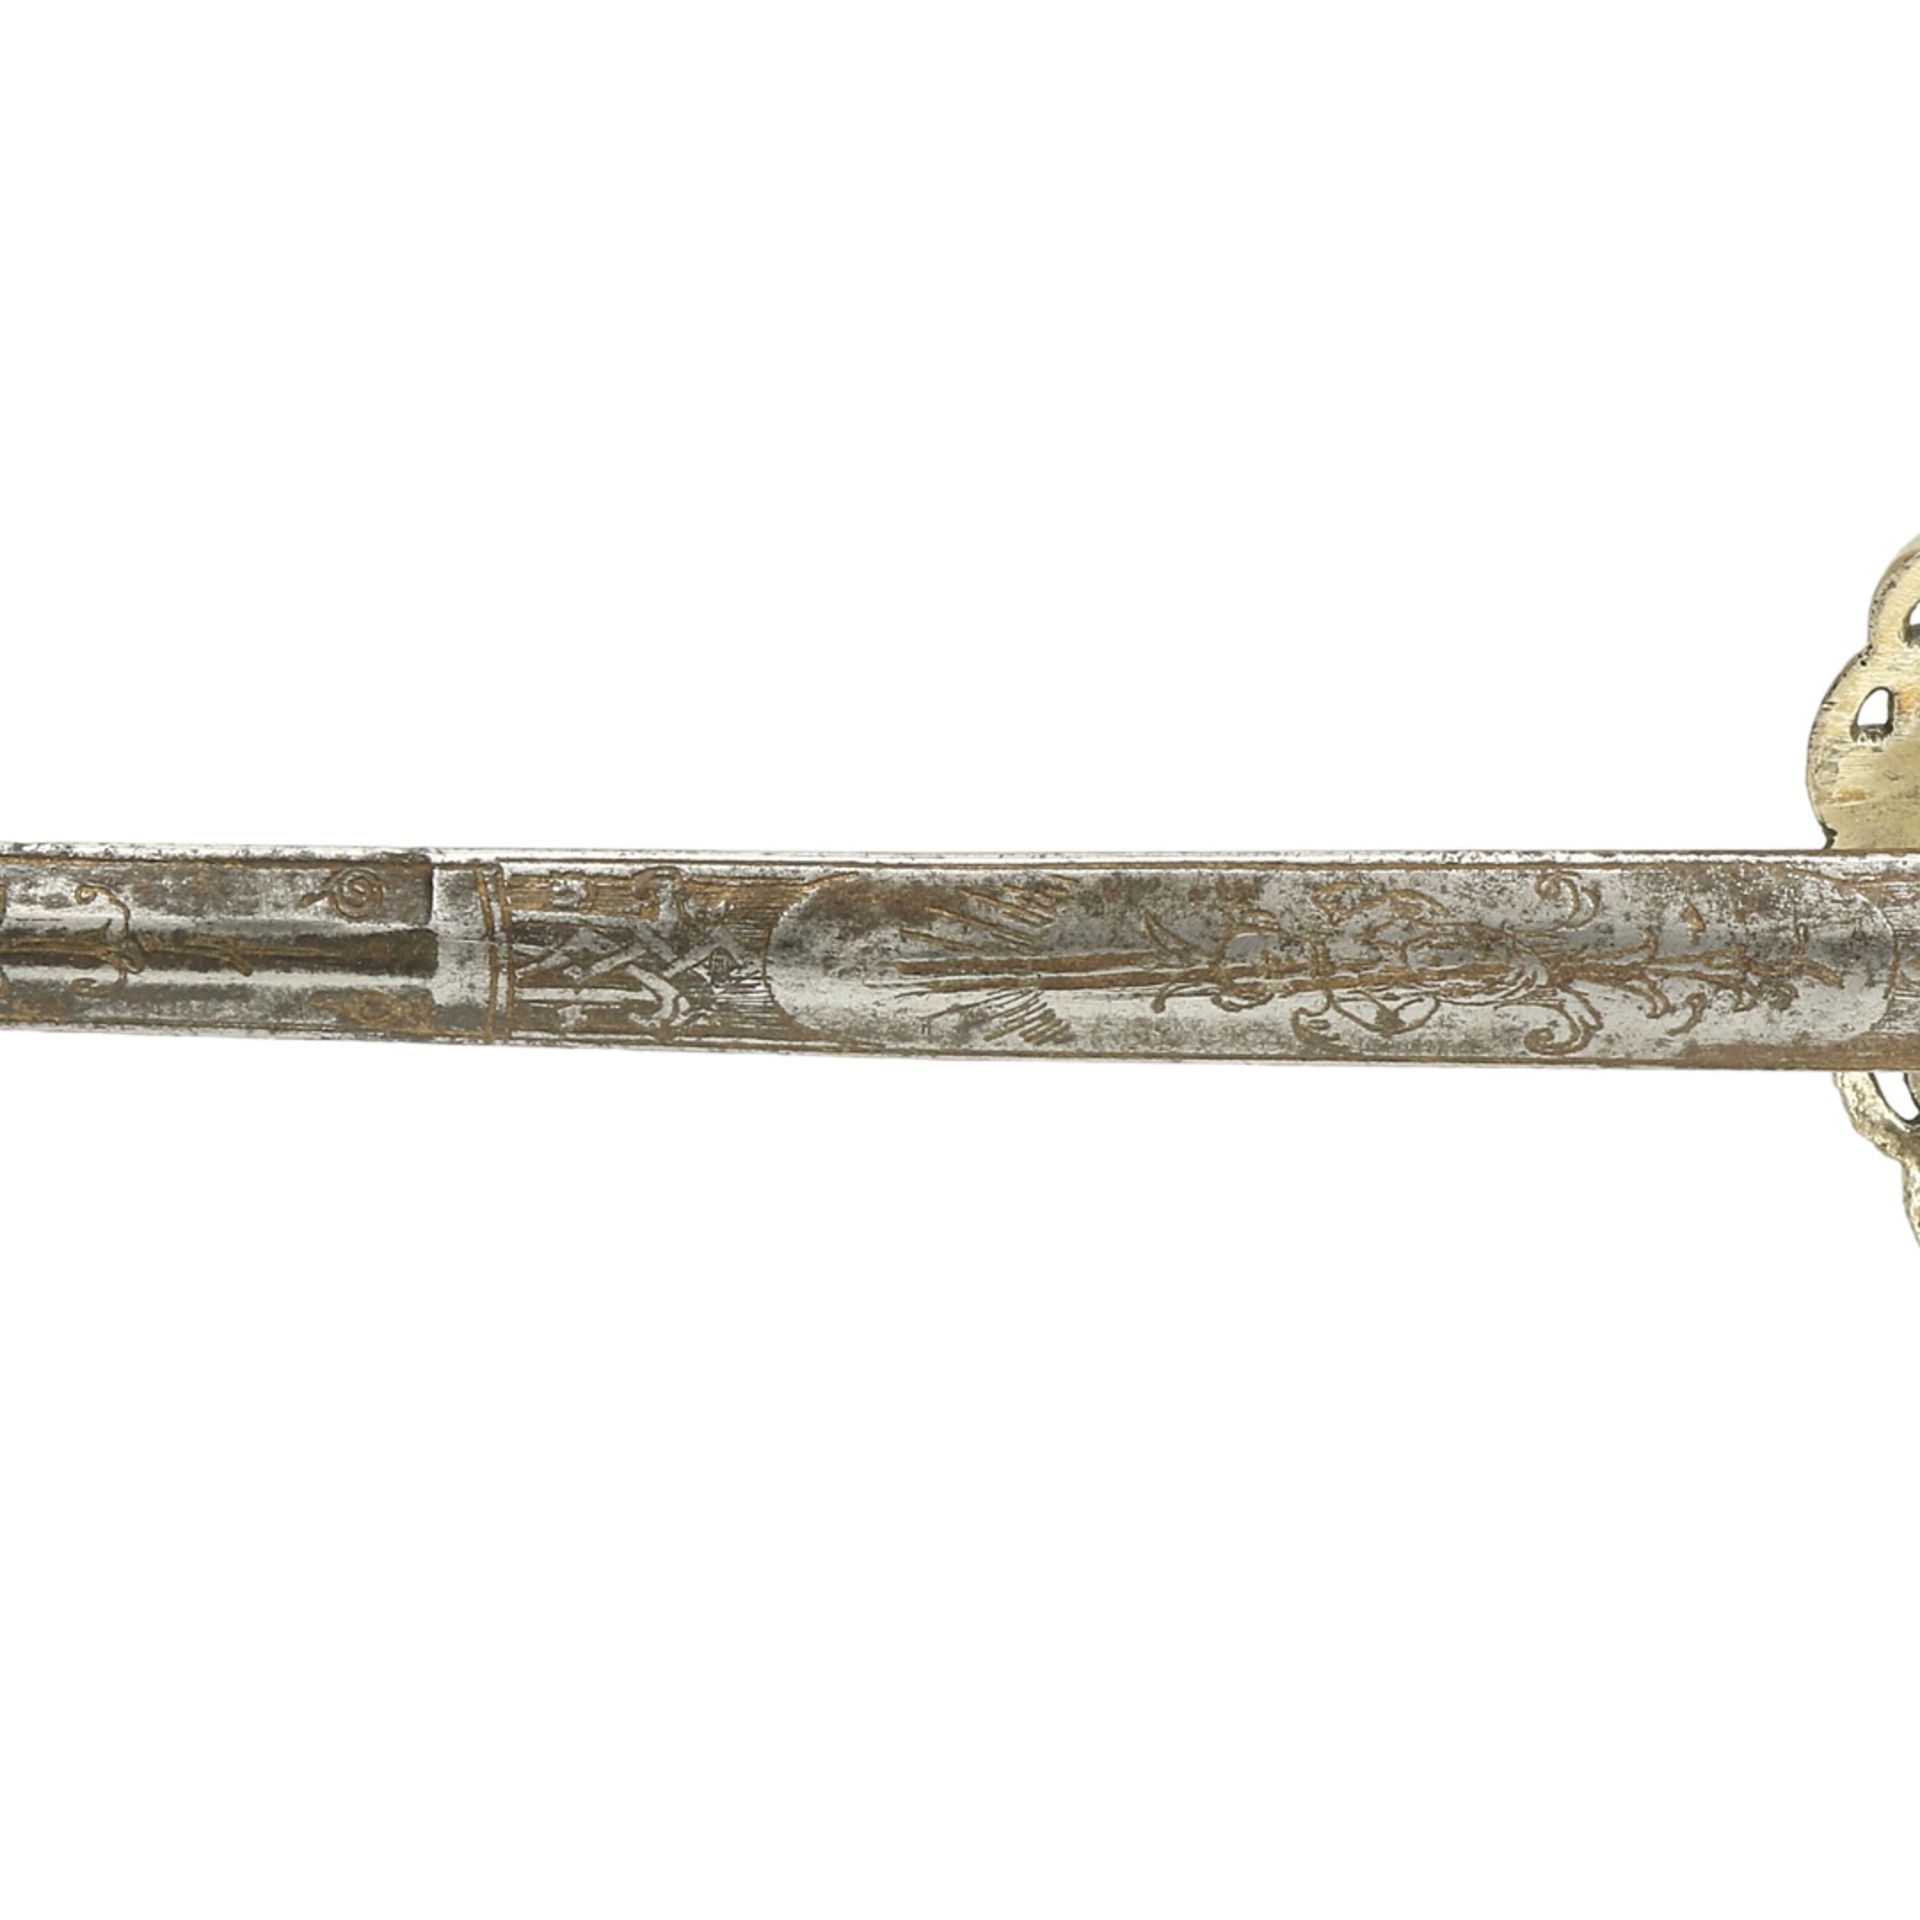 Probably a French decorative sword, around 1850 - Image 4 of 5